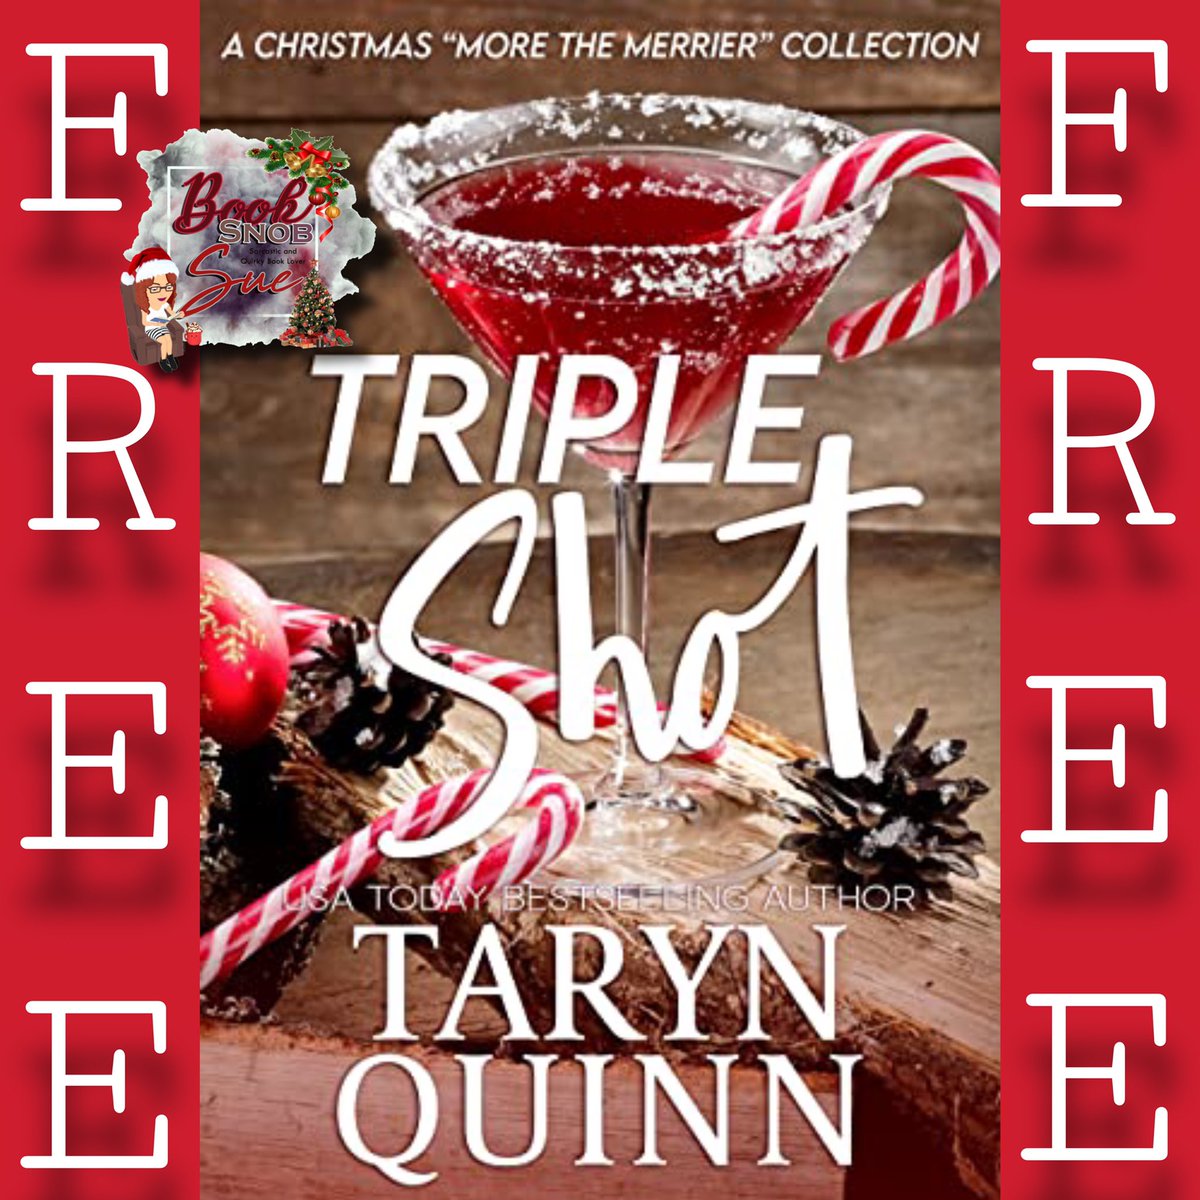 #FreeCollection #TripleShot by #TarynQuinn @TQauthor @quinnandelliott @cariquinn #ad 
A CHRISTMAS “MORE THE MERRIER” COLLECTION
 
Time to ho ho ho…
Steam up your winter with this trio of super hot Christmas romances.

Amazon
amzn.to/3oIUh33